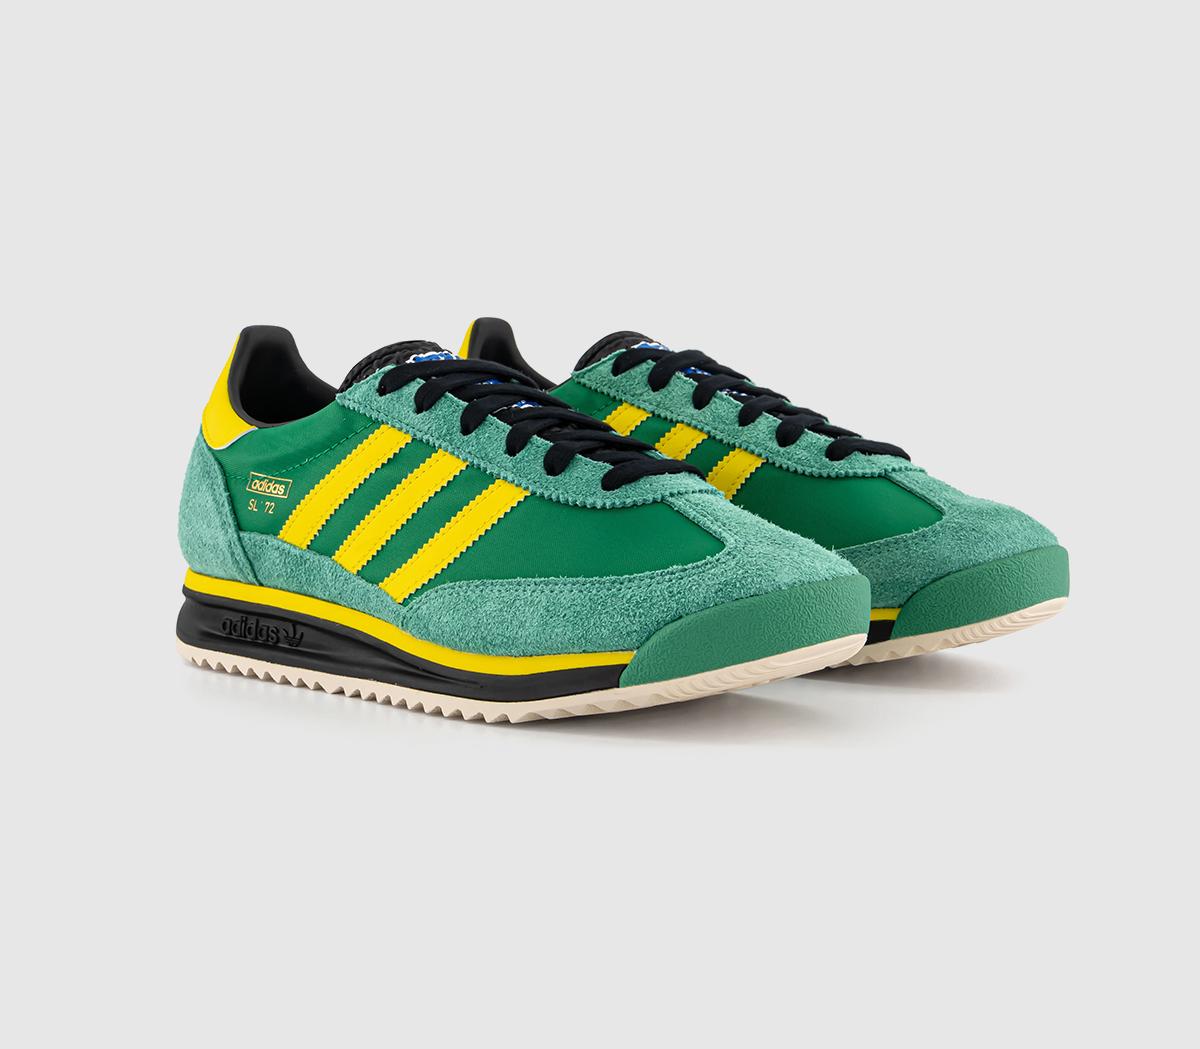 Adidas SL 72 RS Trainers Green Yellow, 4